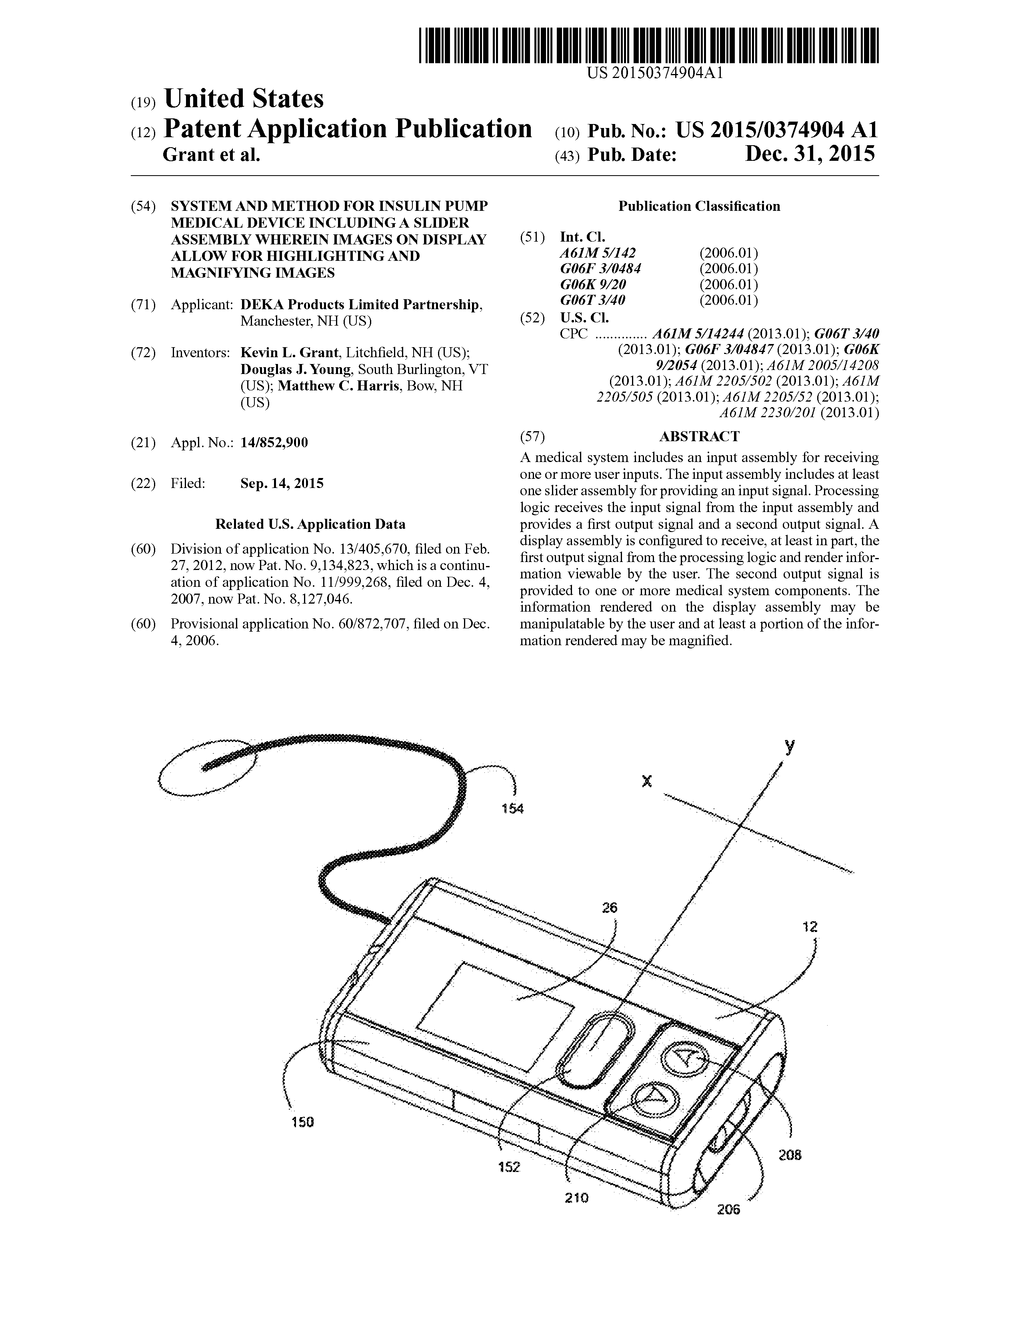 SYSTEM AND METHOD FOR INSULIN PUMP MEDICAL DEVICE INCLUDING A SLIDER     ASSEMBLY WHEREIN IMAGES ON DISPLAY ALLOW FOR HIGHLIGHTING AND MAGNIFYING     IMAGES - diagram, schematic, and image 01